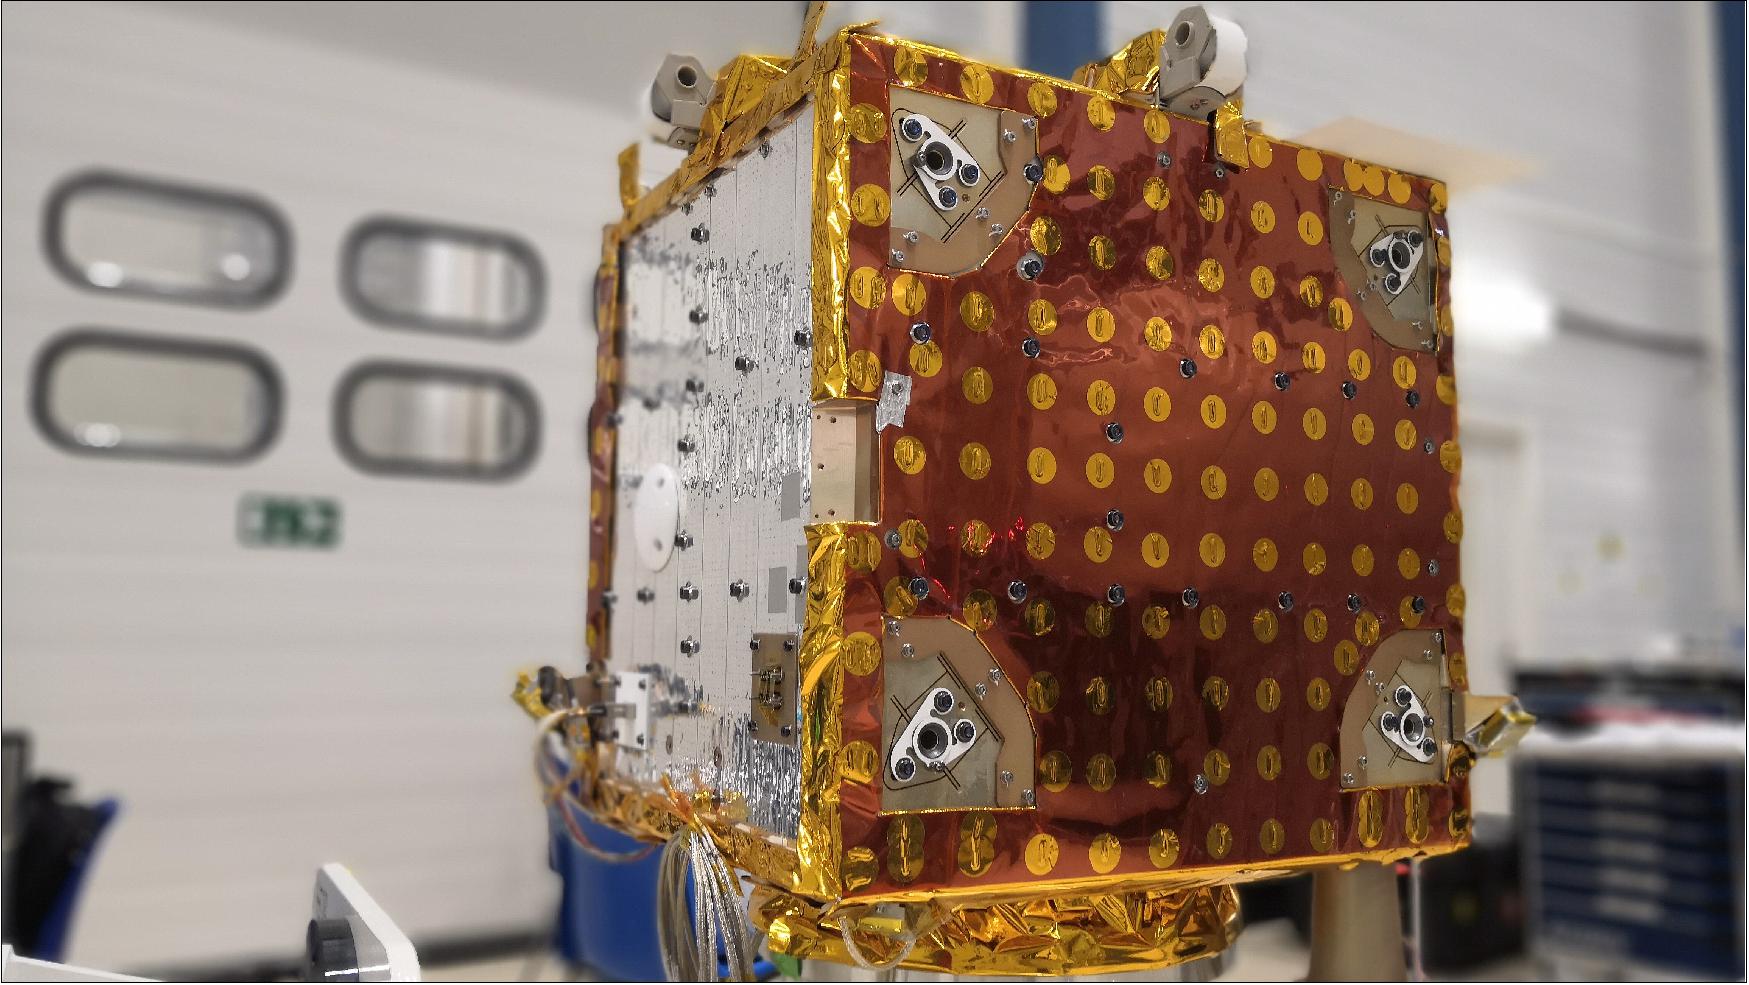 Figure 3: The ESAIL microsatellite completes environmental tests (image credit: LuxSpace)